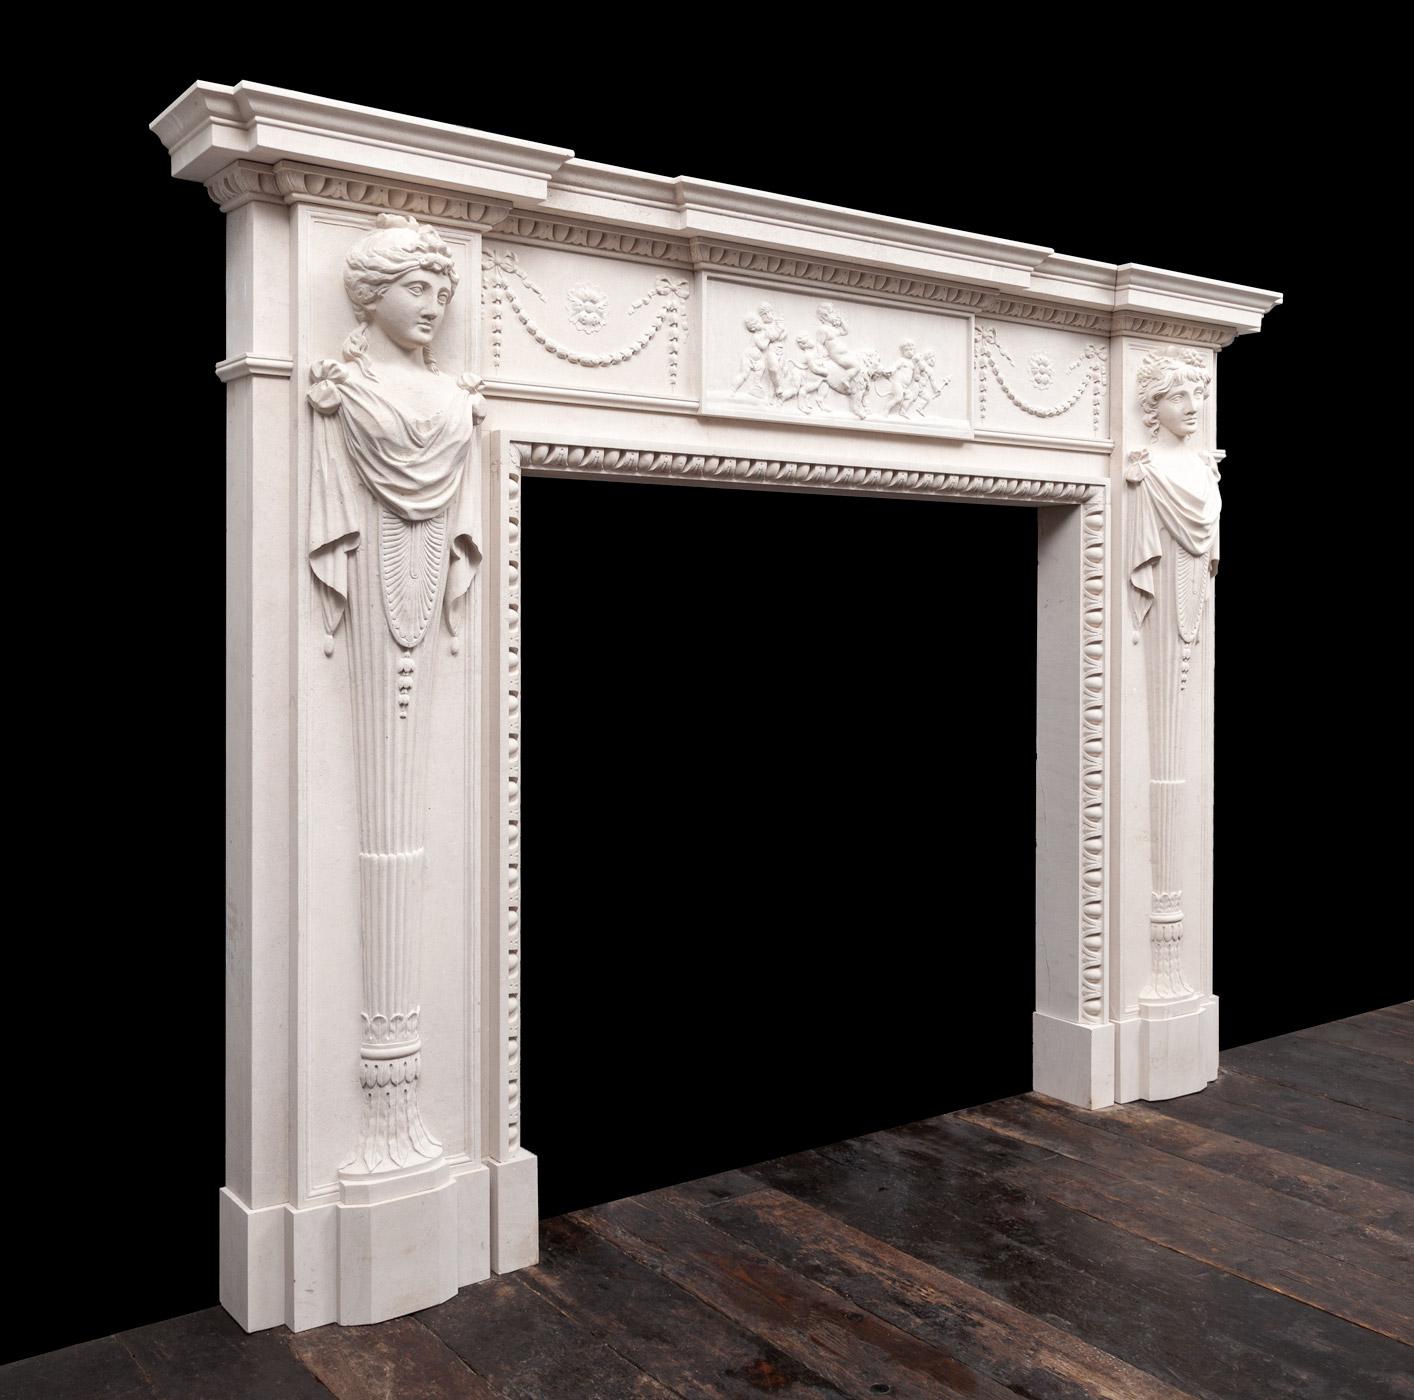 A superb neoclassical George III style Portland stone mantelpiece. The tall and full pilaster length terms with beautifully carved busts of Bacchus and Ariadne.

Delicate swags of bell-flowers tied with ribbons decorate the frieze panels, these